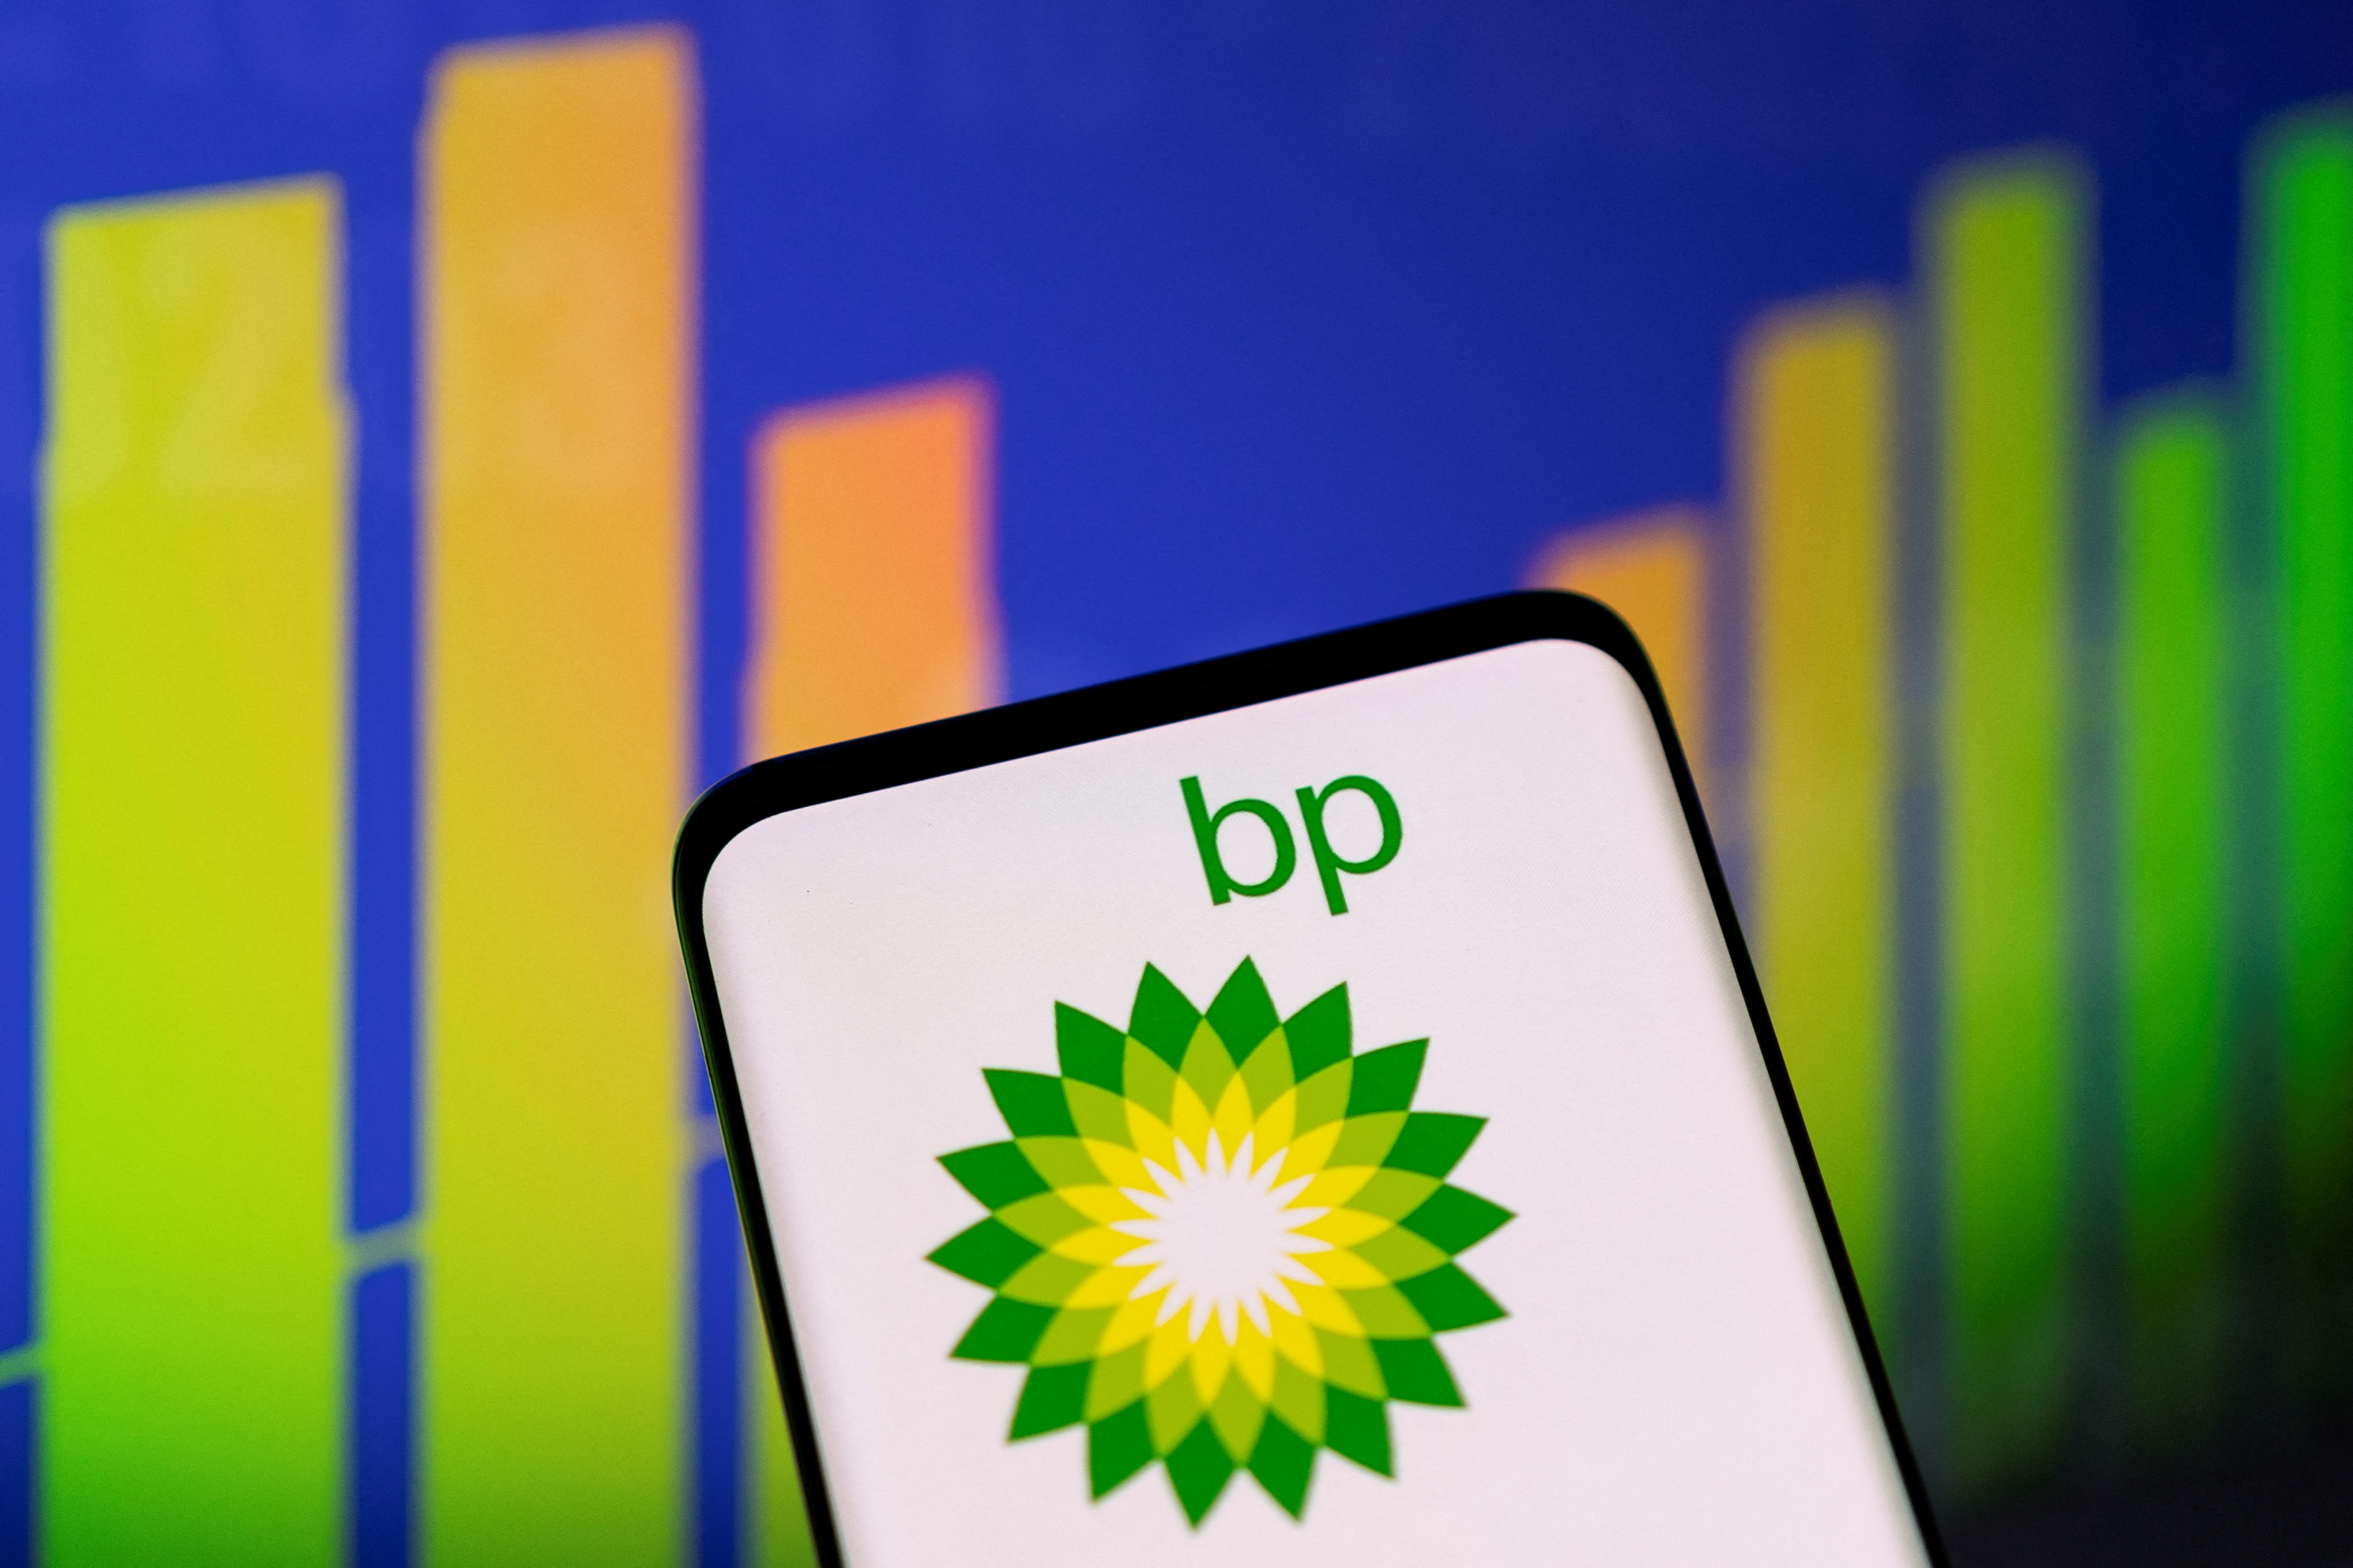 Illustration shows BP logo and stock graph